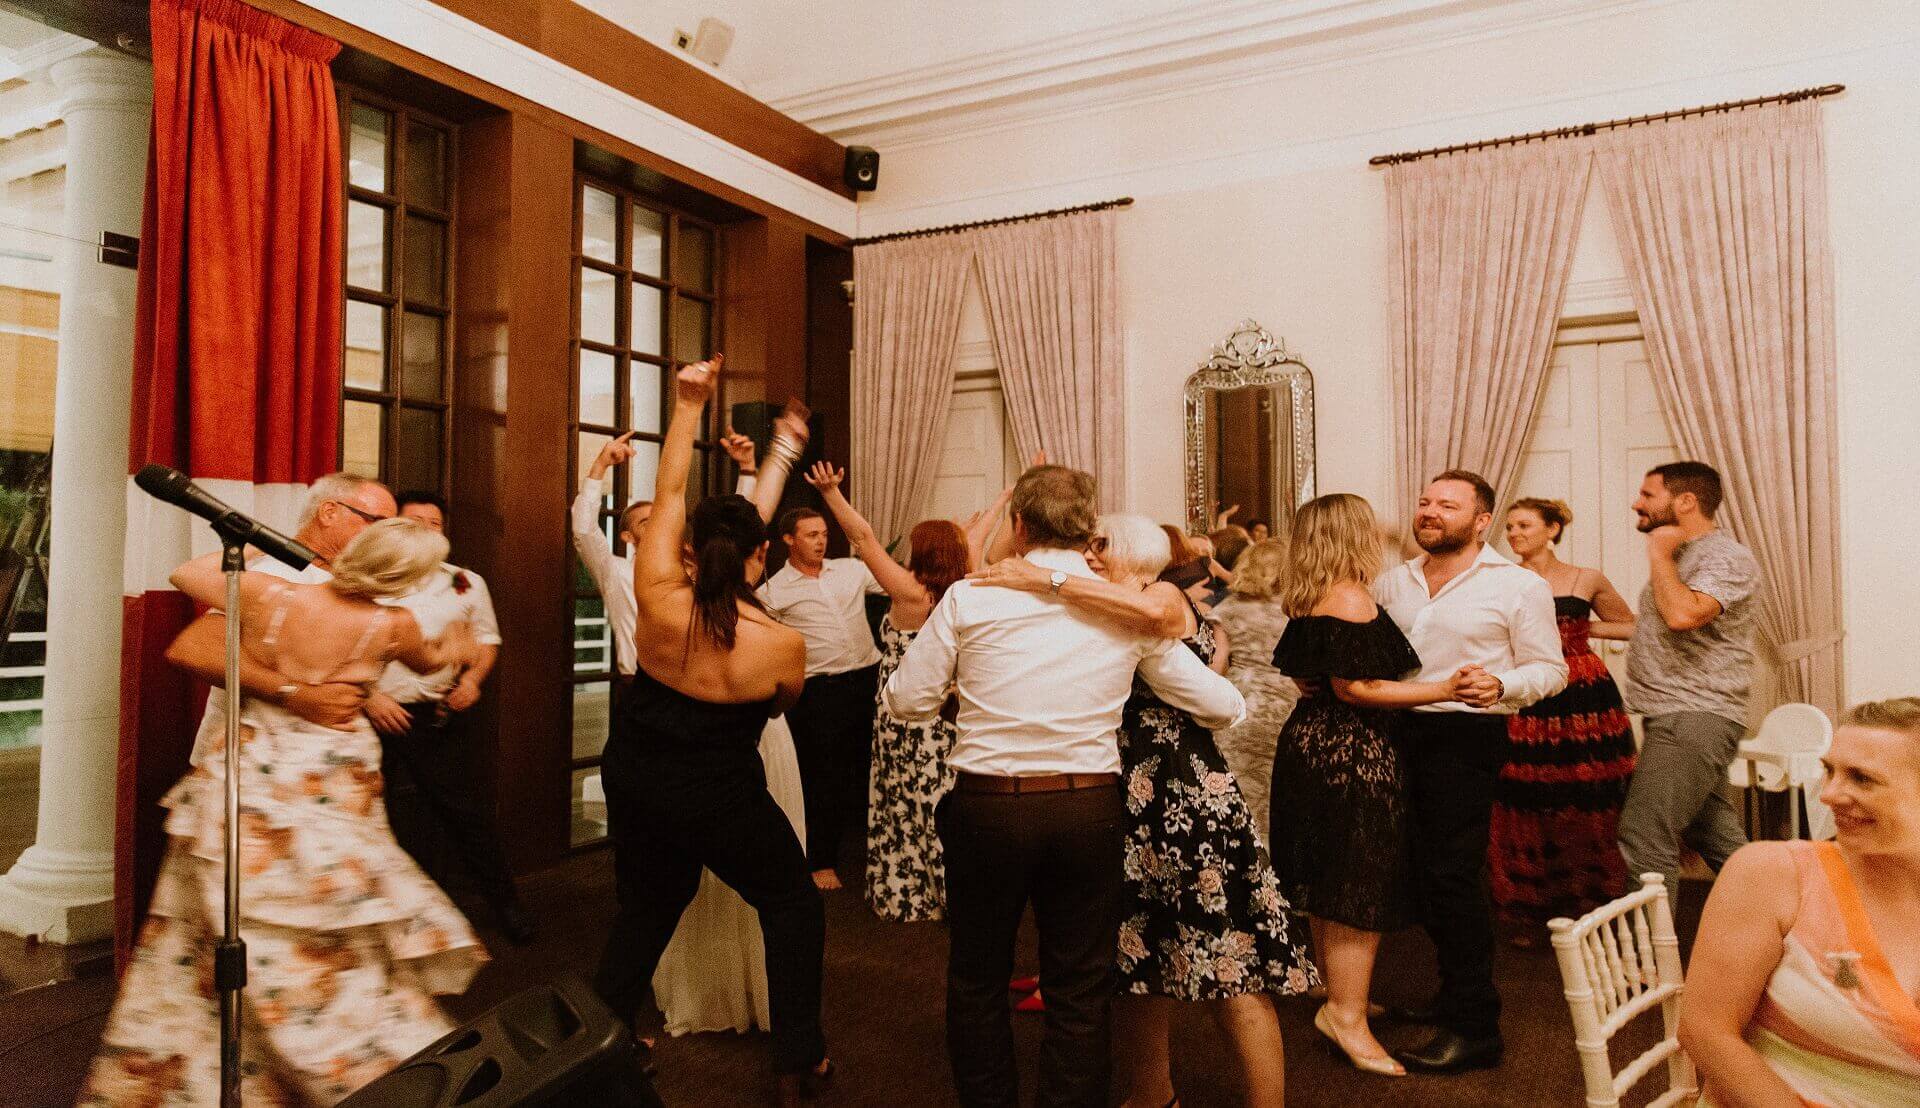 Sugar & Spice Events - Guests enjoying themselves at the dancing floor after the wedding ceremony